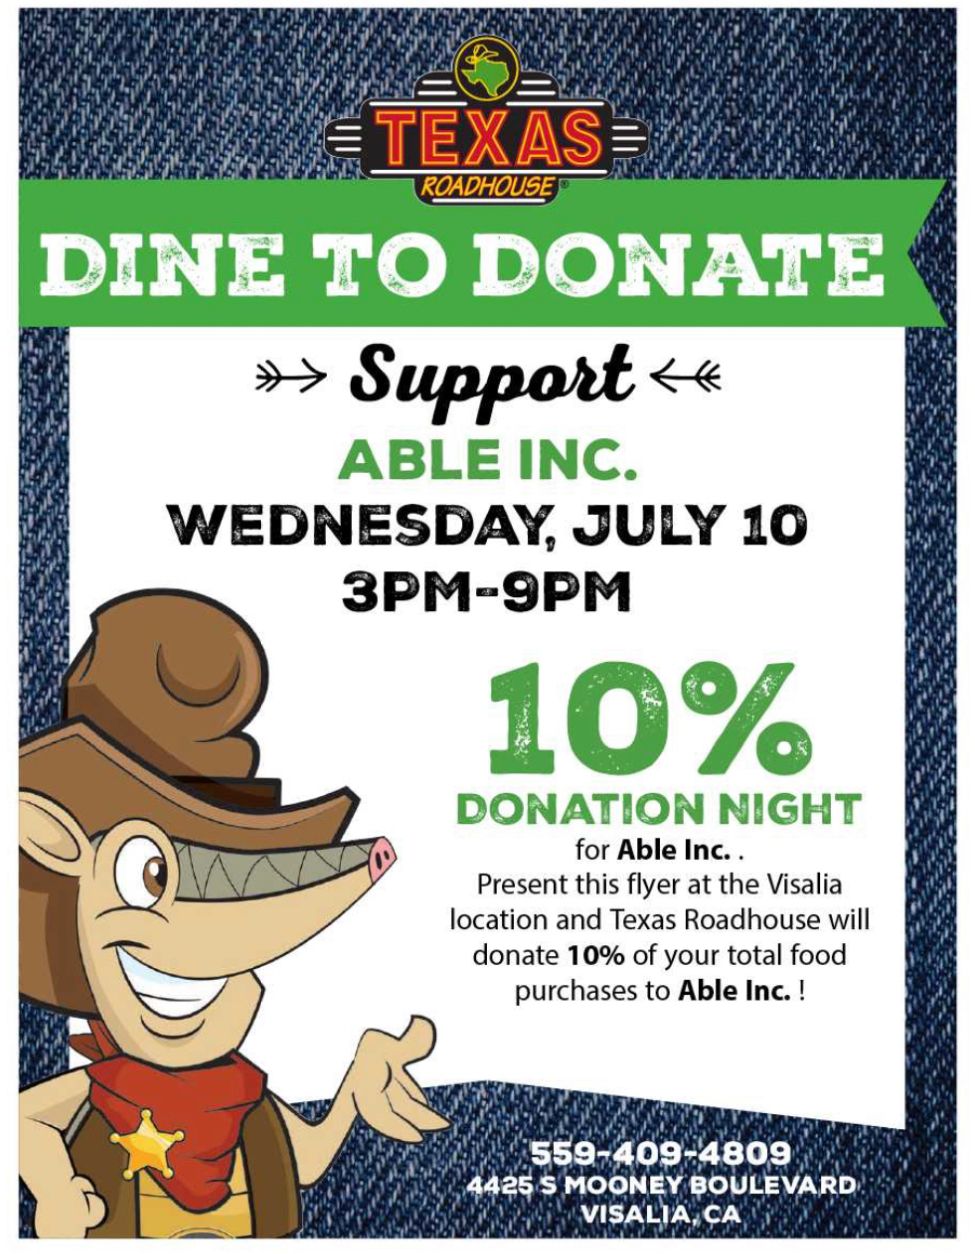 Dine To Donate at Texas Roadhouse!